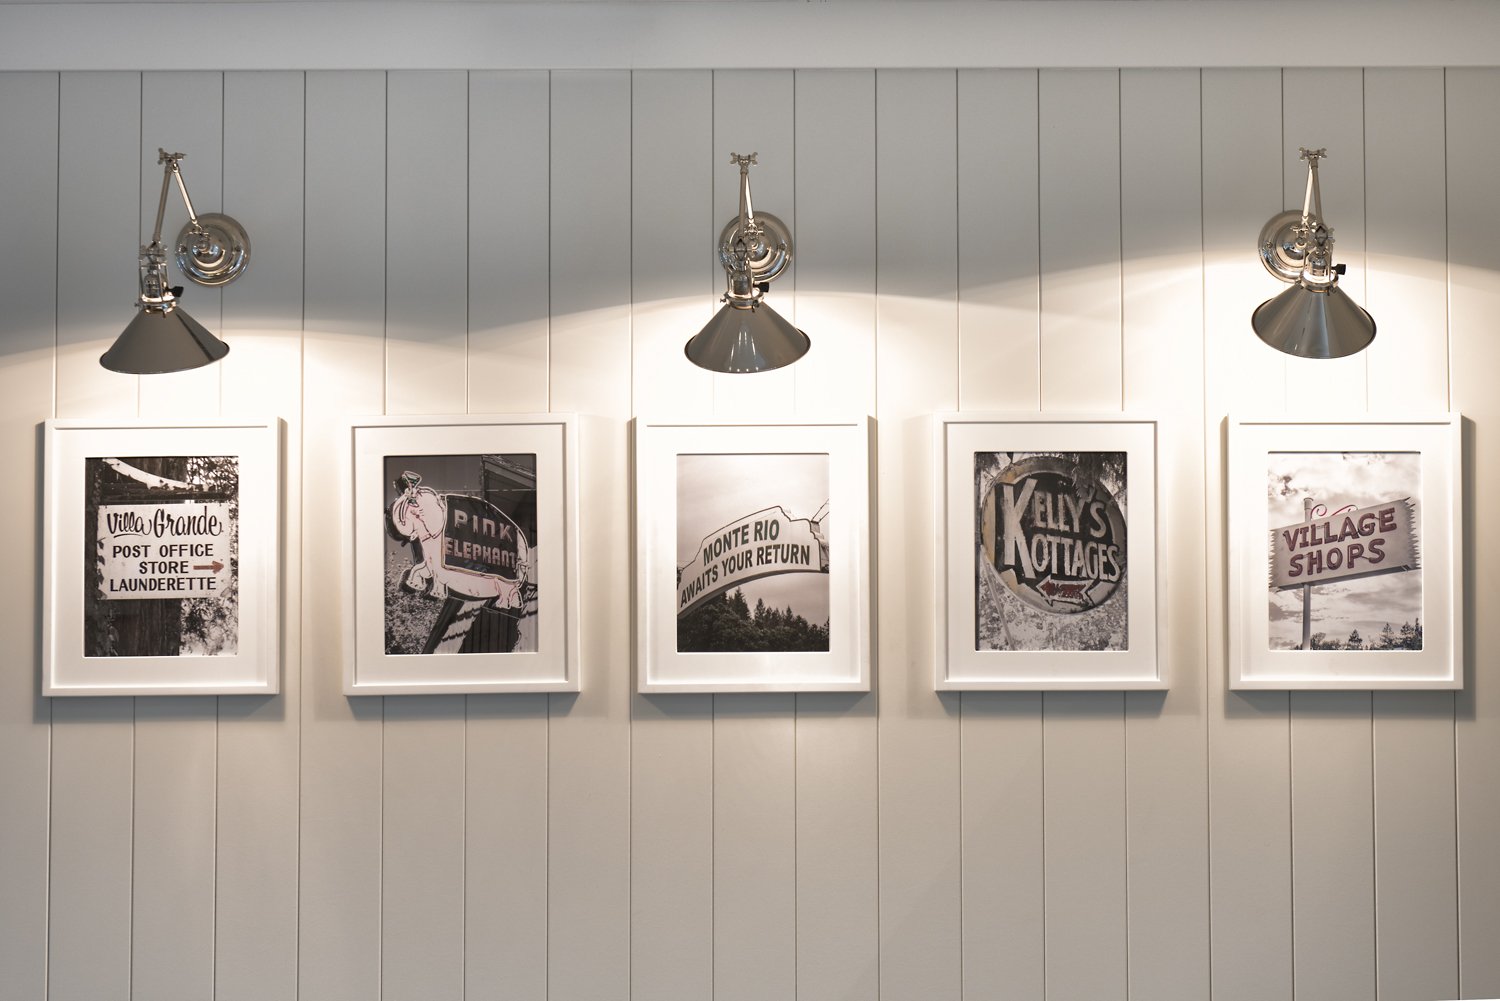  A gallery wall with black and white images of Monte Rio, lit with a silver sconce light.  